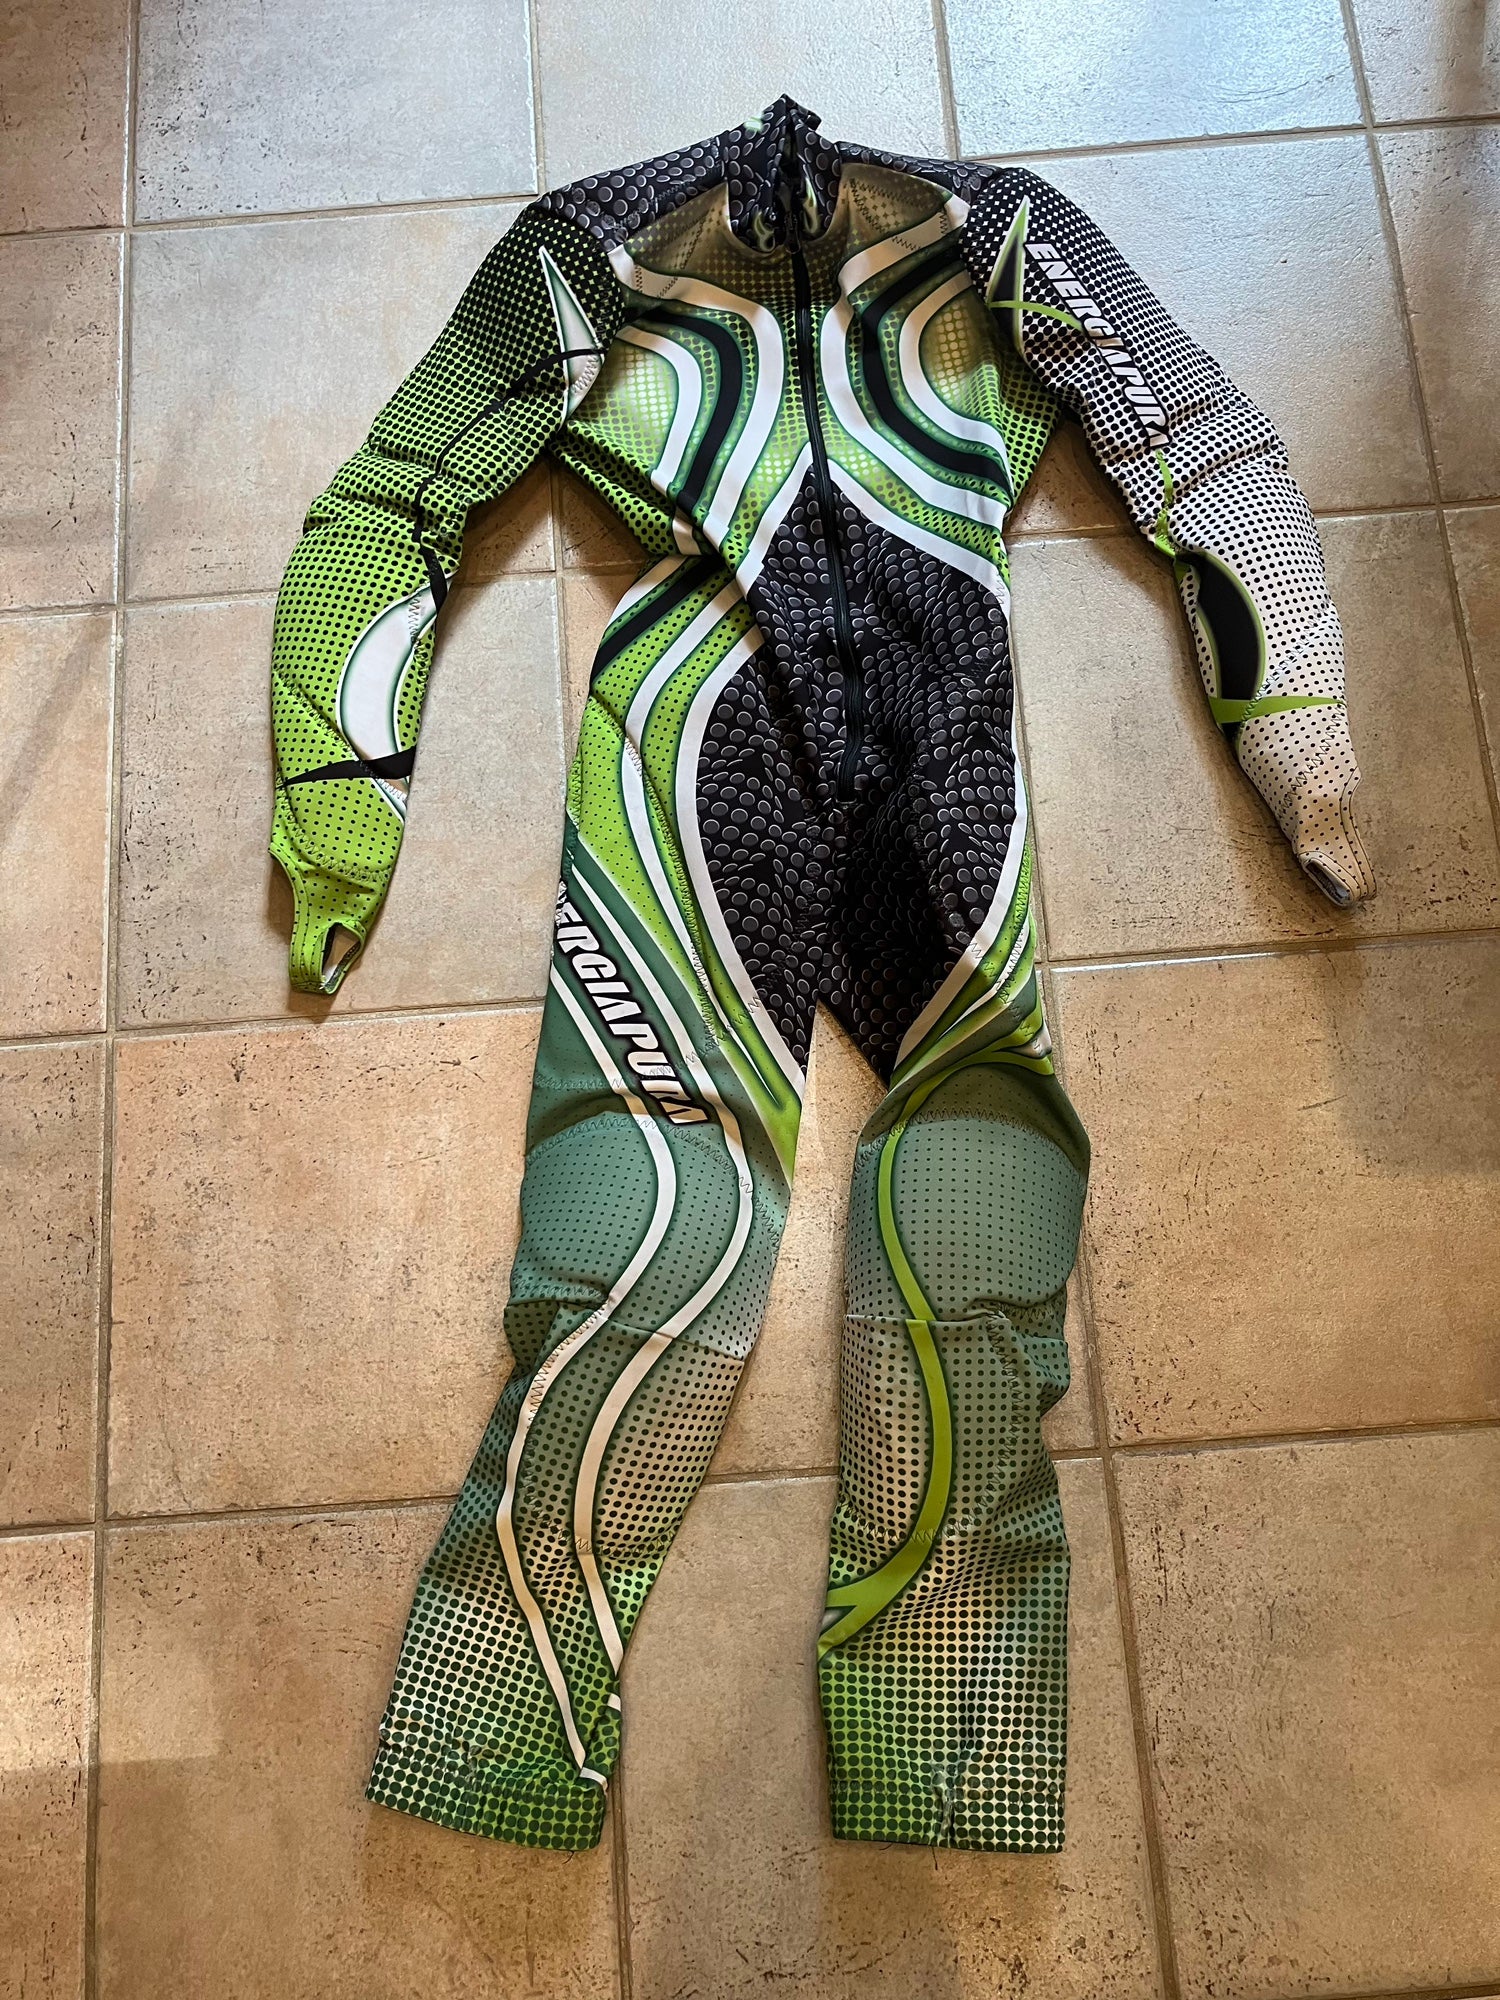 Spyder US Ski Team World Cup GS Race Suit padded Extra Small